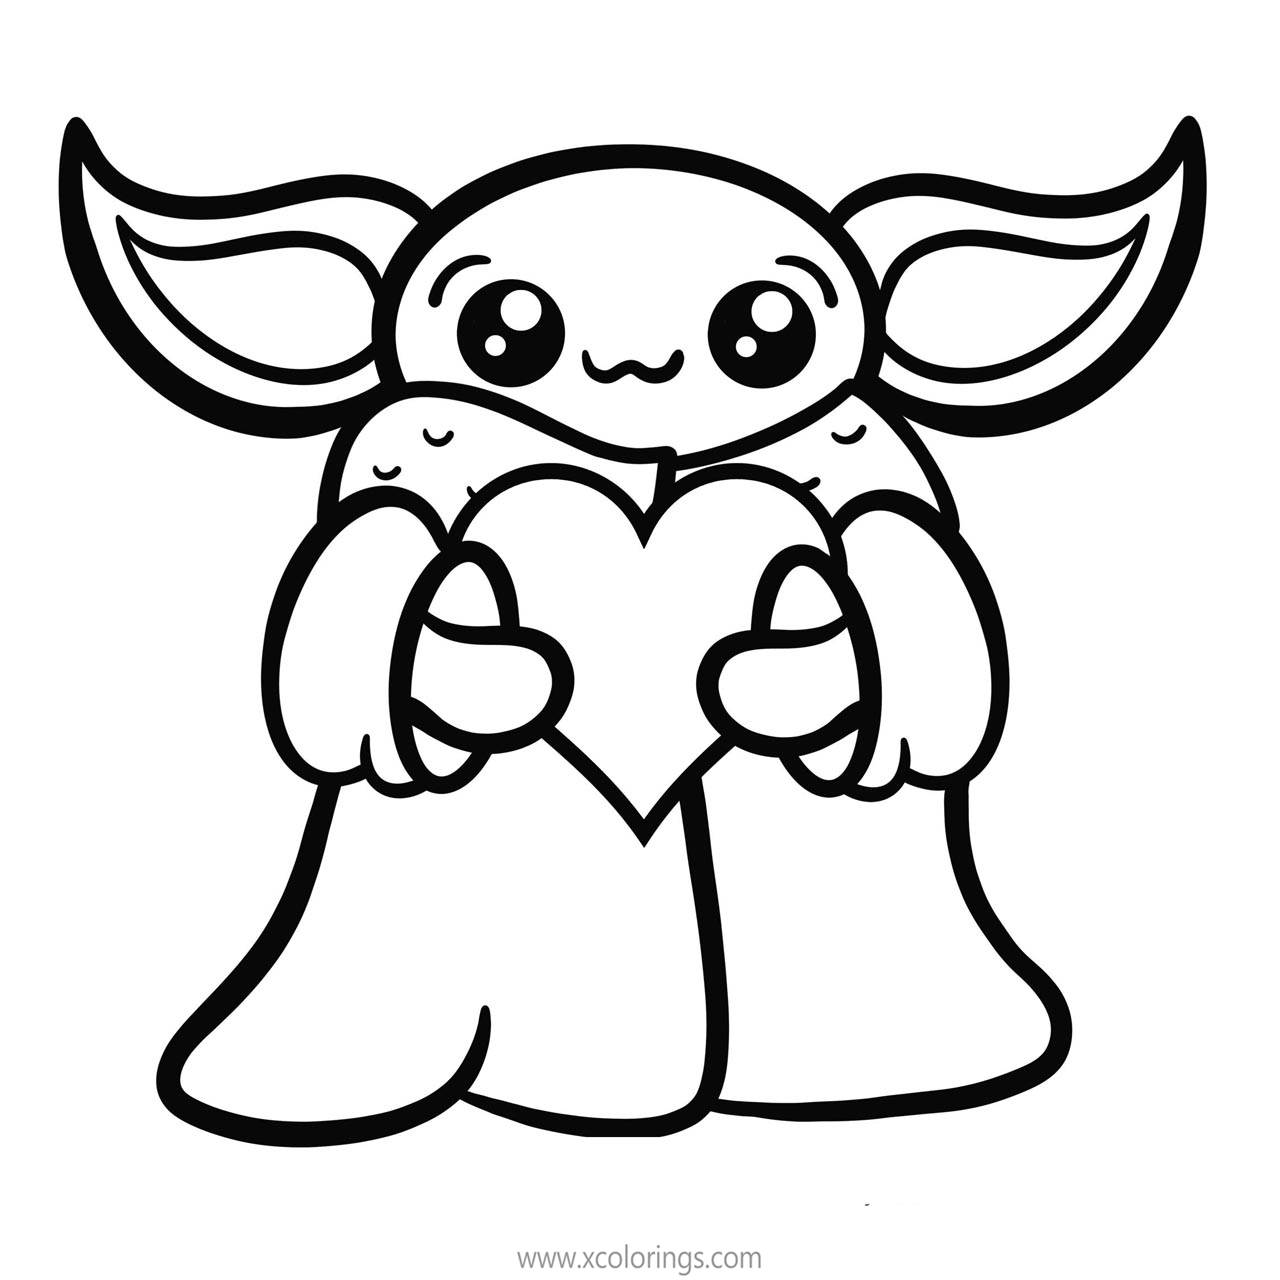  Coloring Pages Of Baby Yoda Free Download Gambr co